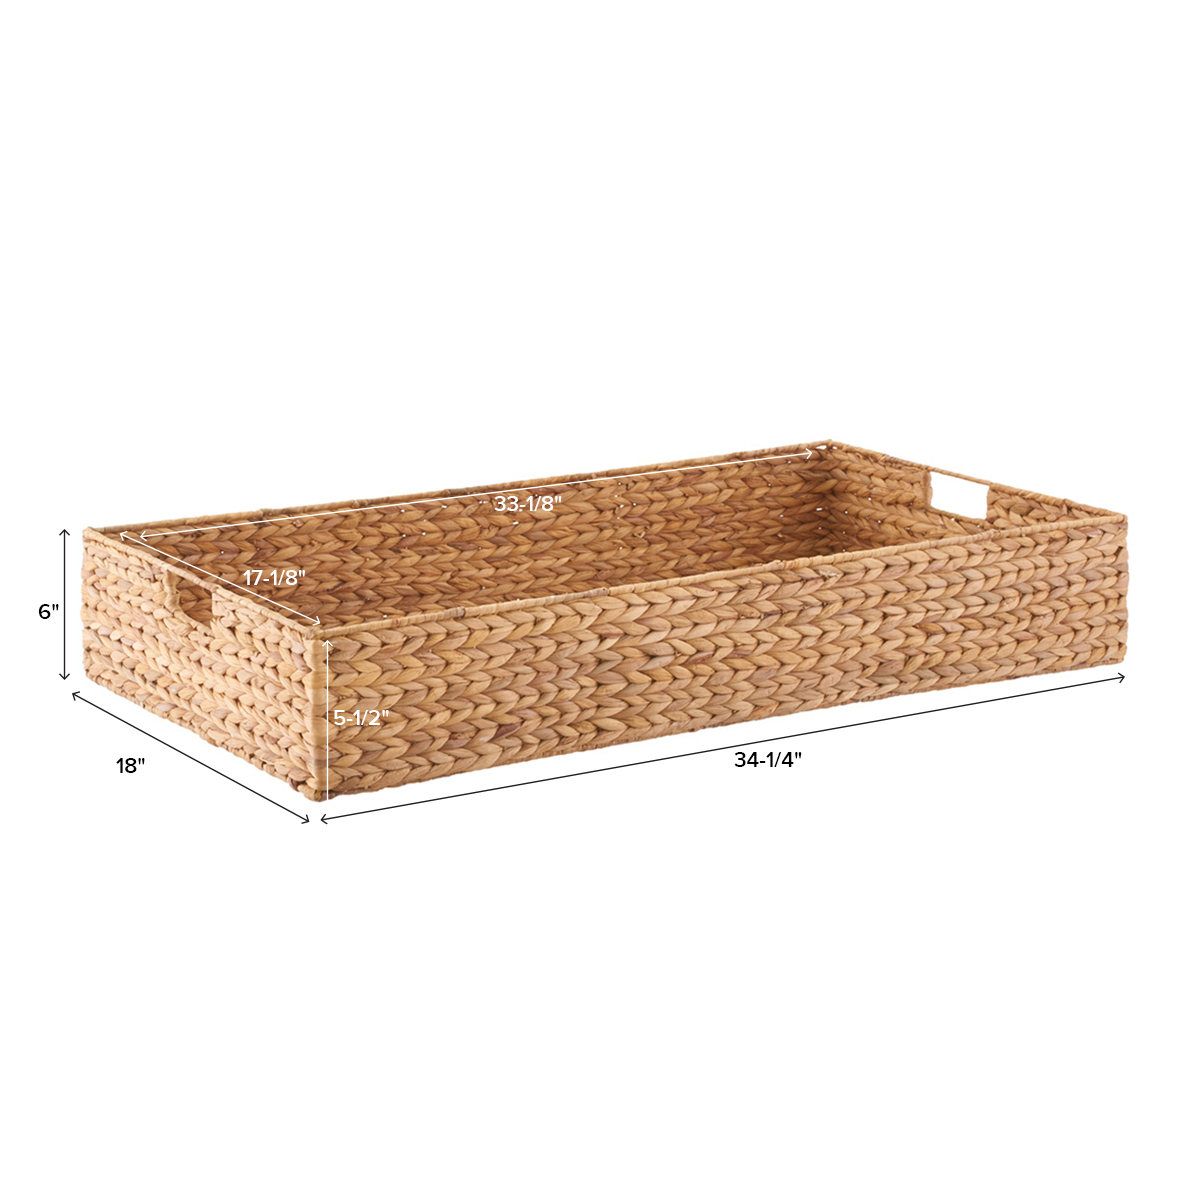 Water Hyacinth Coffee Table/Under Bed Bin | The Container Store